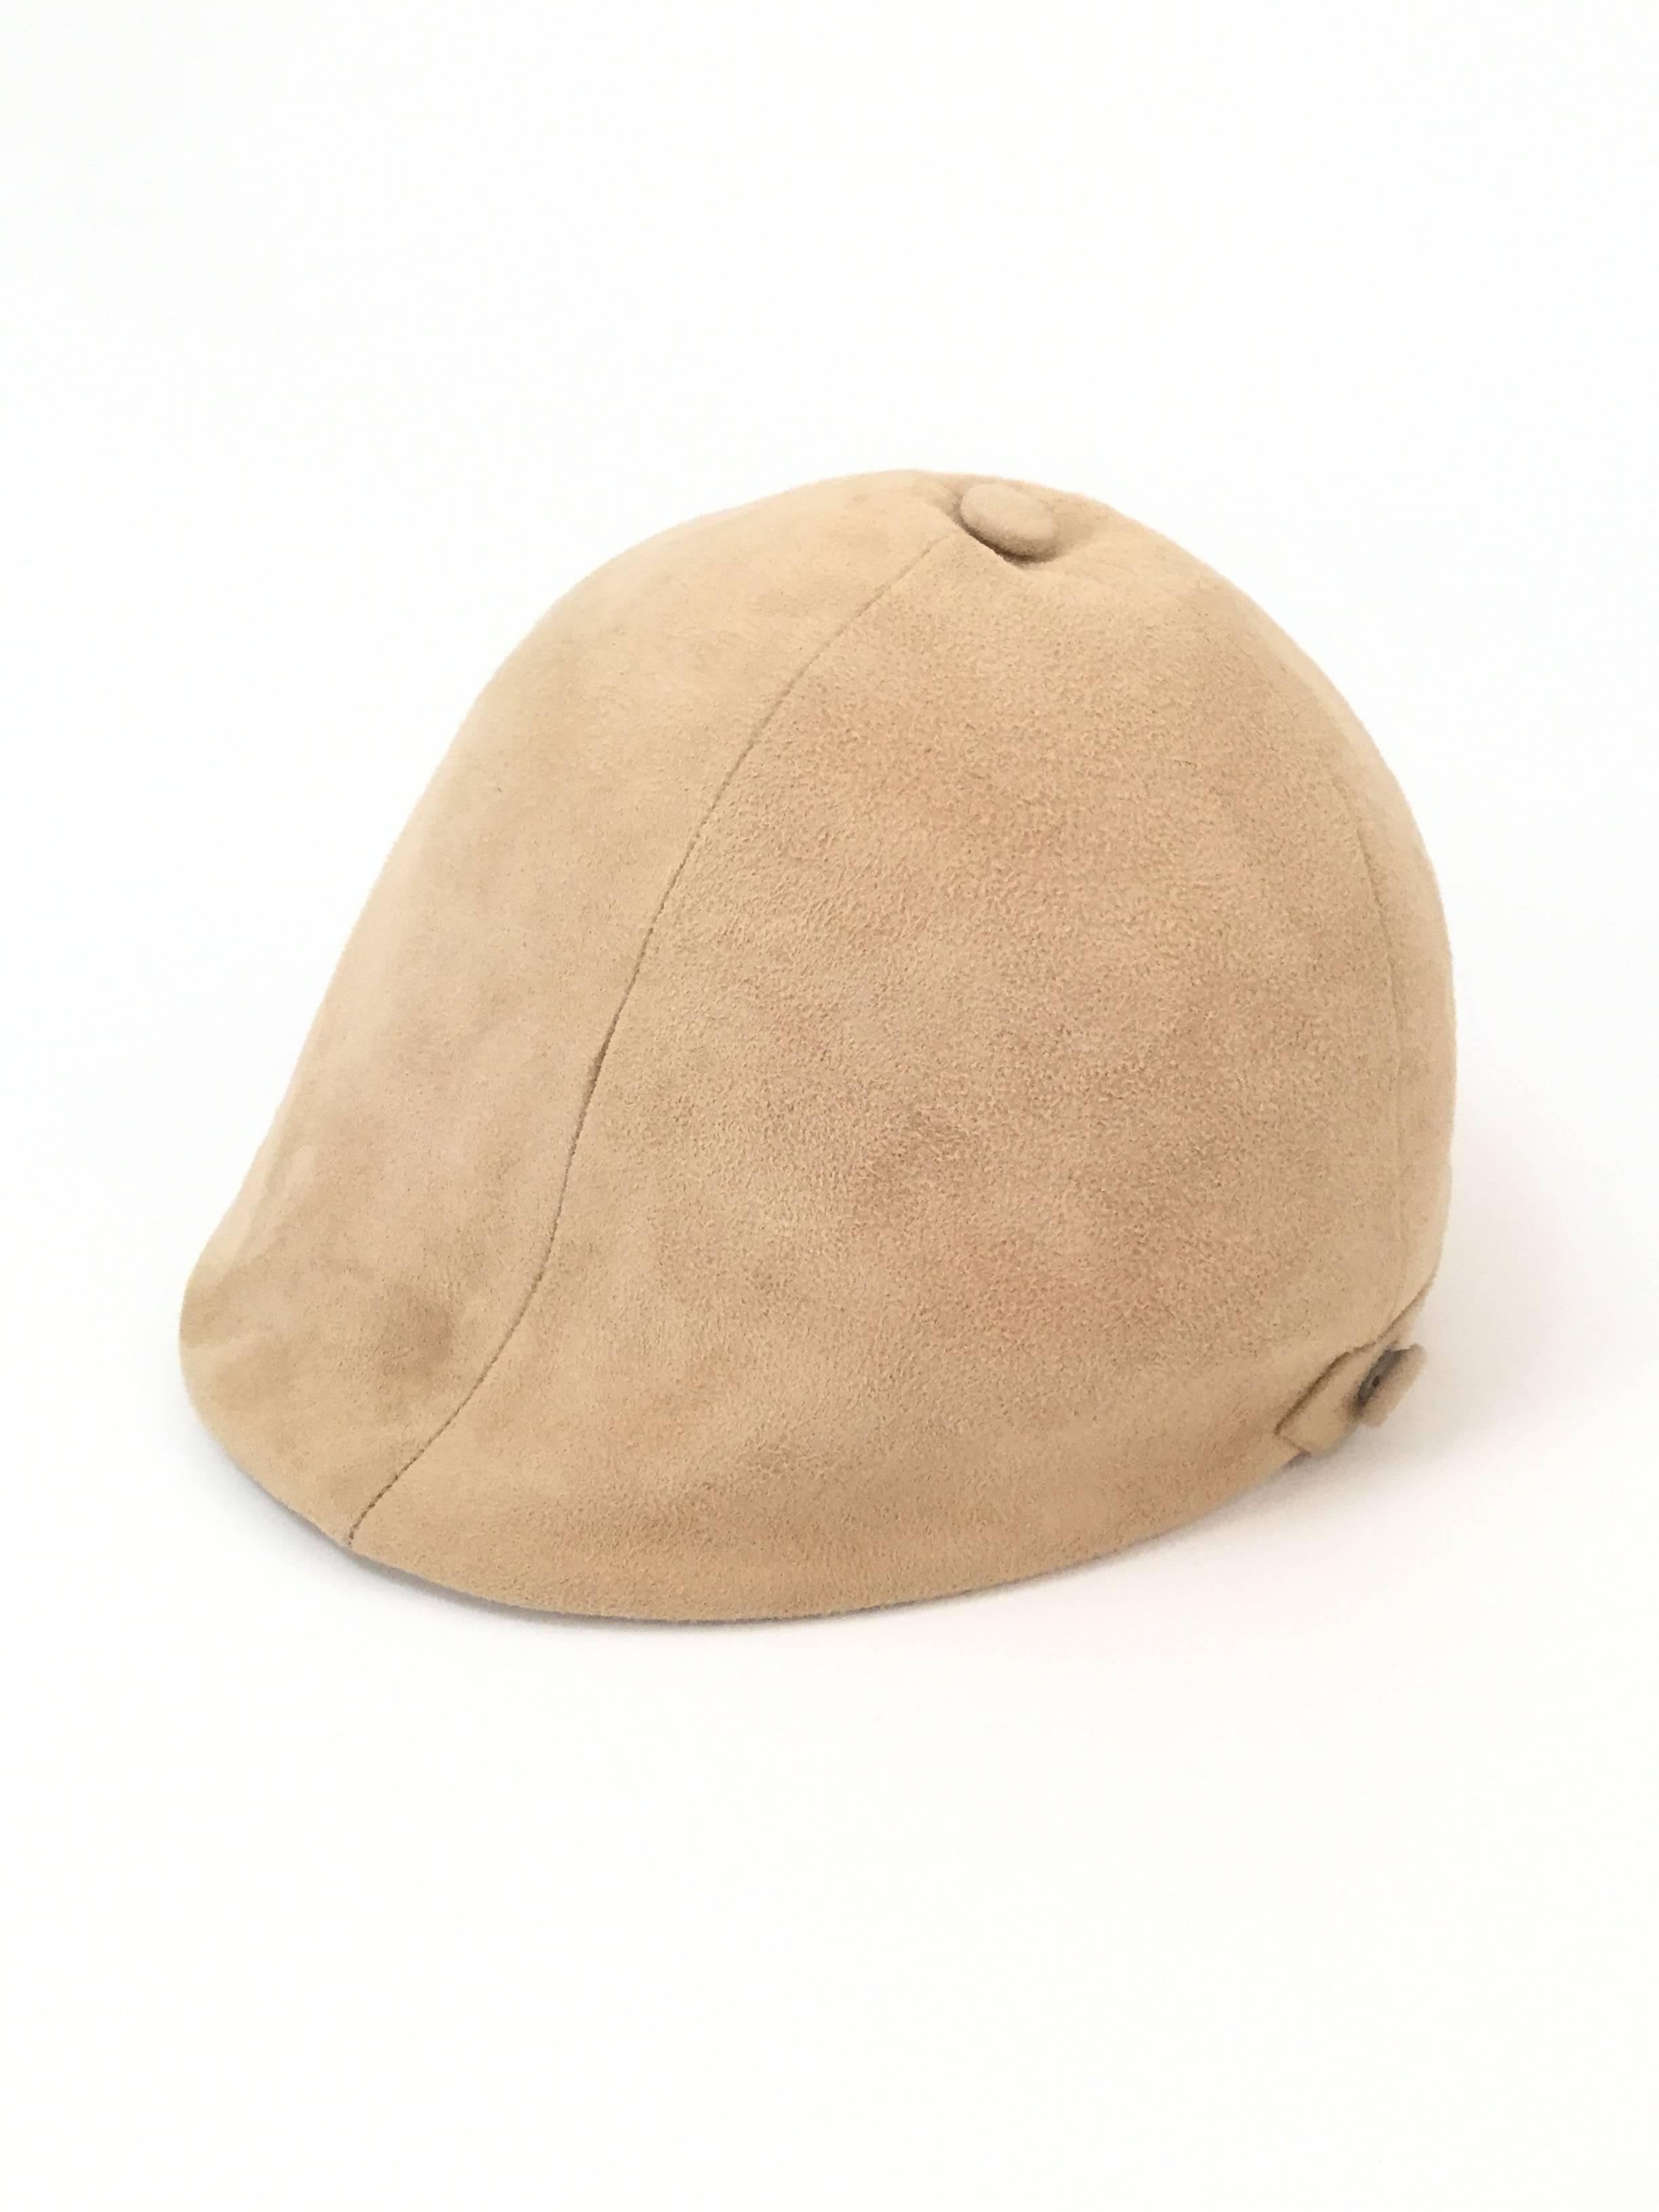 Camel Colored Suede Equestrian Hat, 1960s  For Sale 1